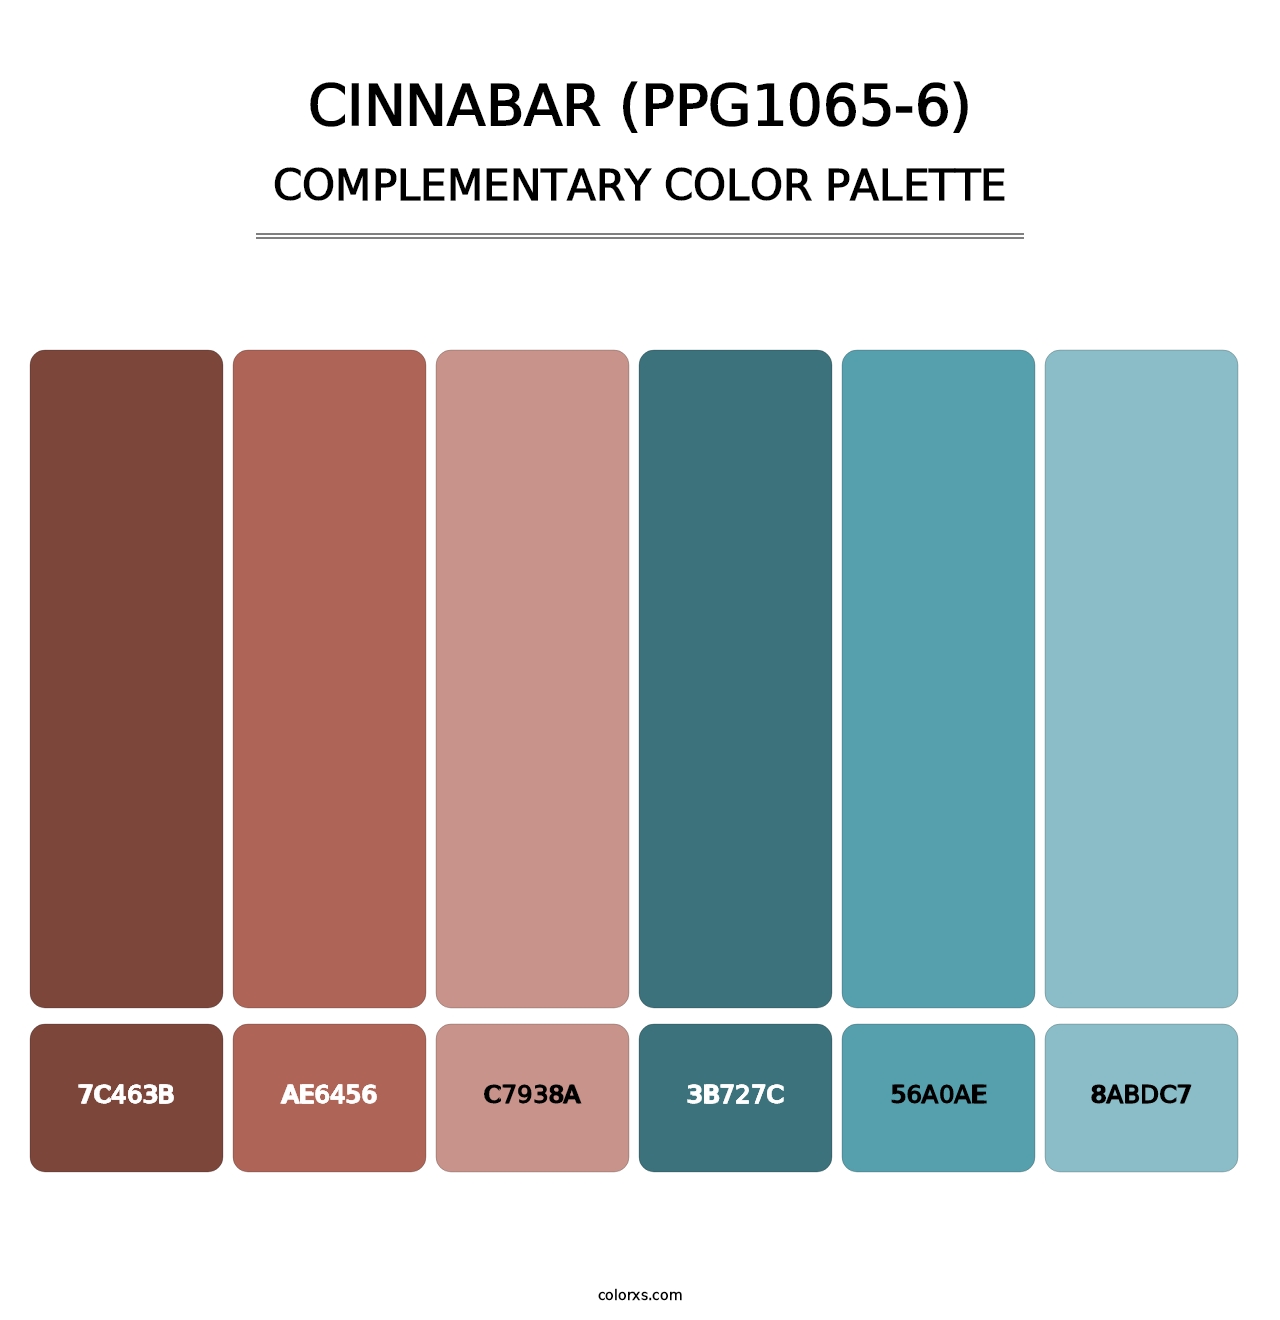 Cinnabar (PPG1065-6) - Complementary Color Palette